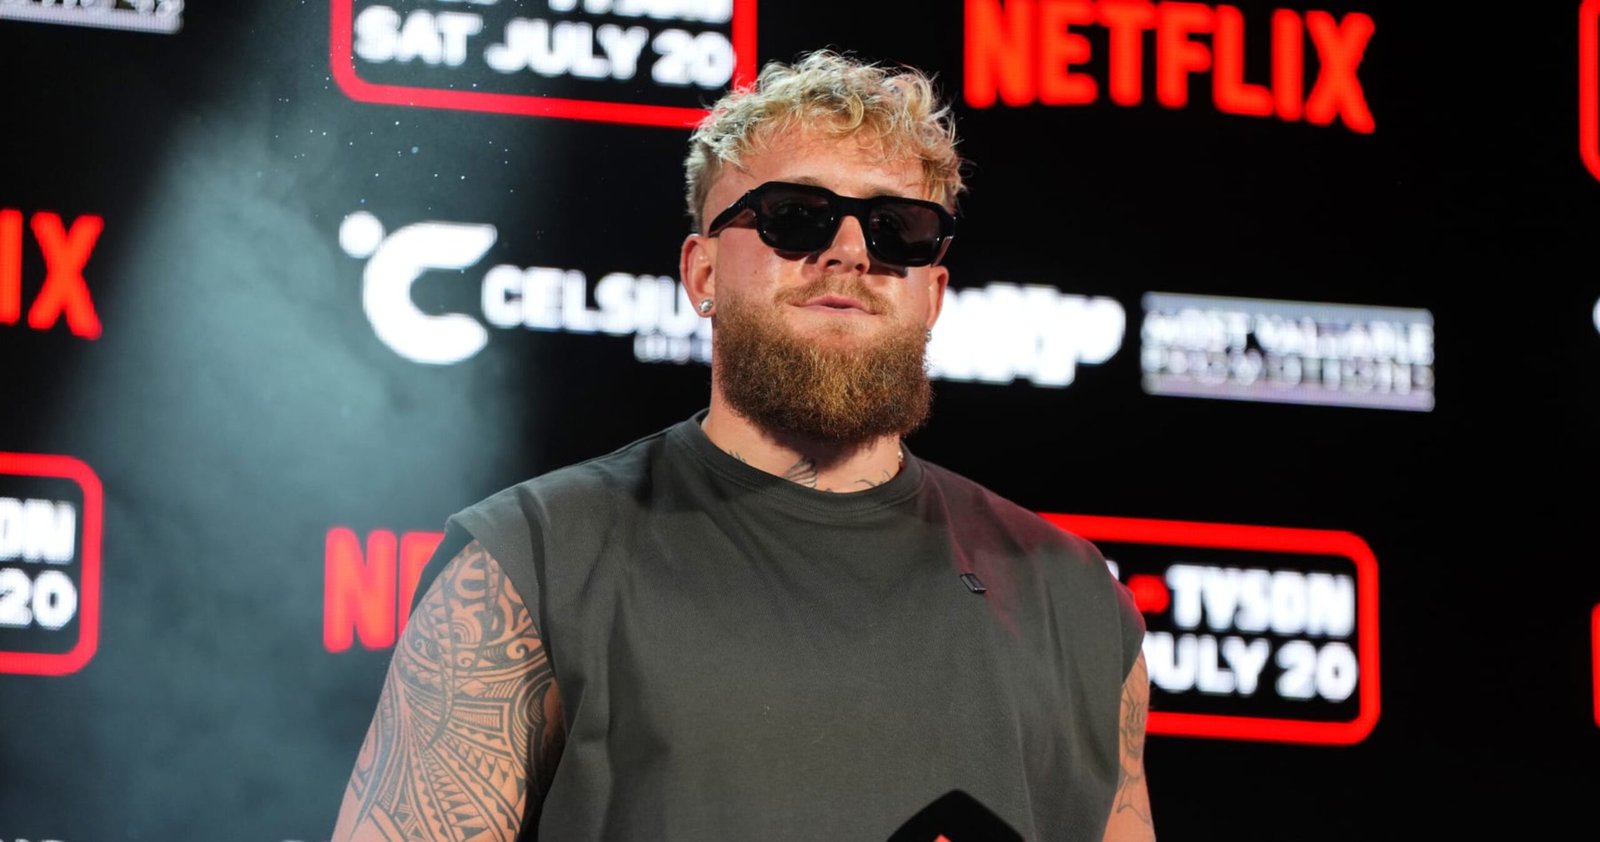 Jake Paul Says He Wants ‘Mike Tyson Vitality’ in Combat vs. Icon: ‘Legend Should Fall’